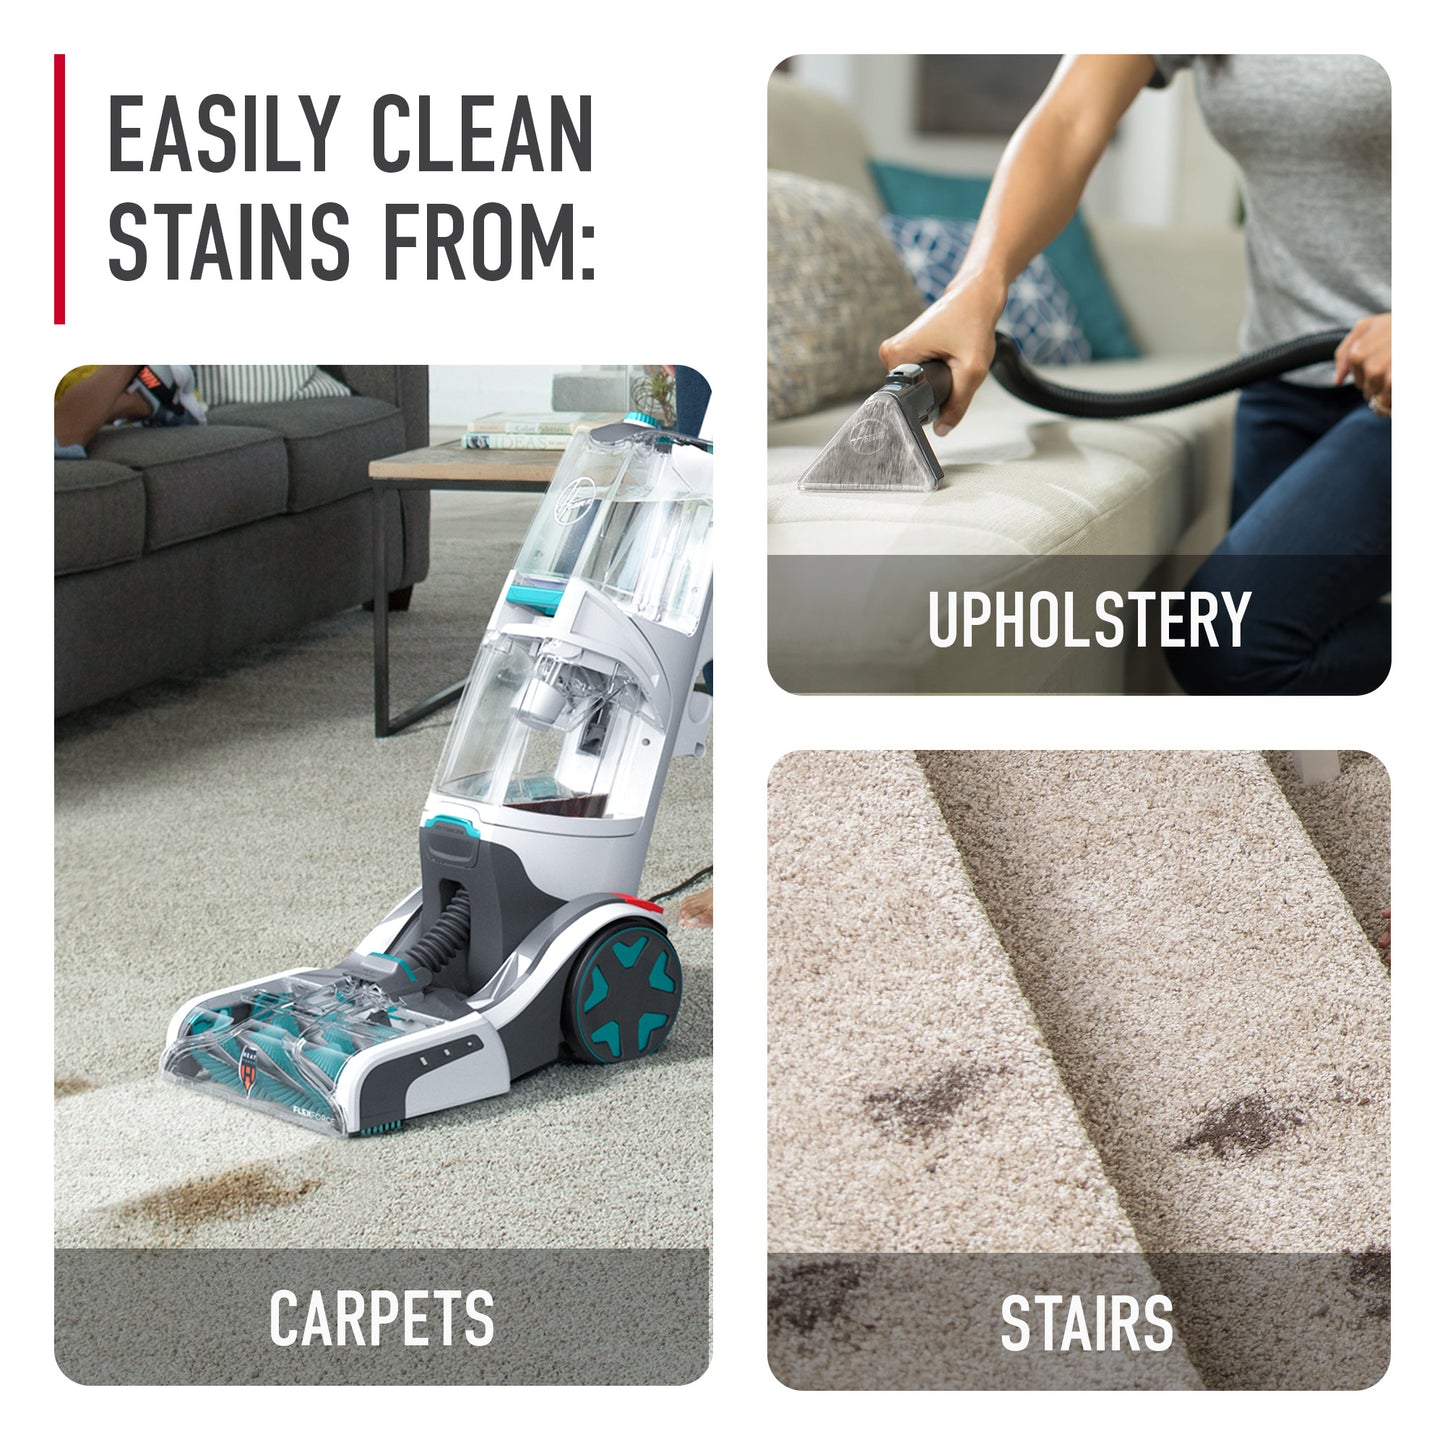 3 images of Hoover carpet cleaner cleaning light colored carpets, stairs, and upholstery.